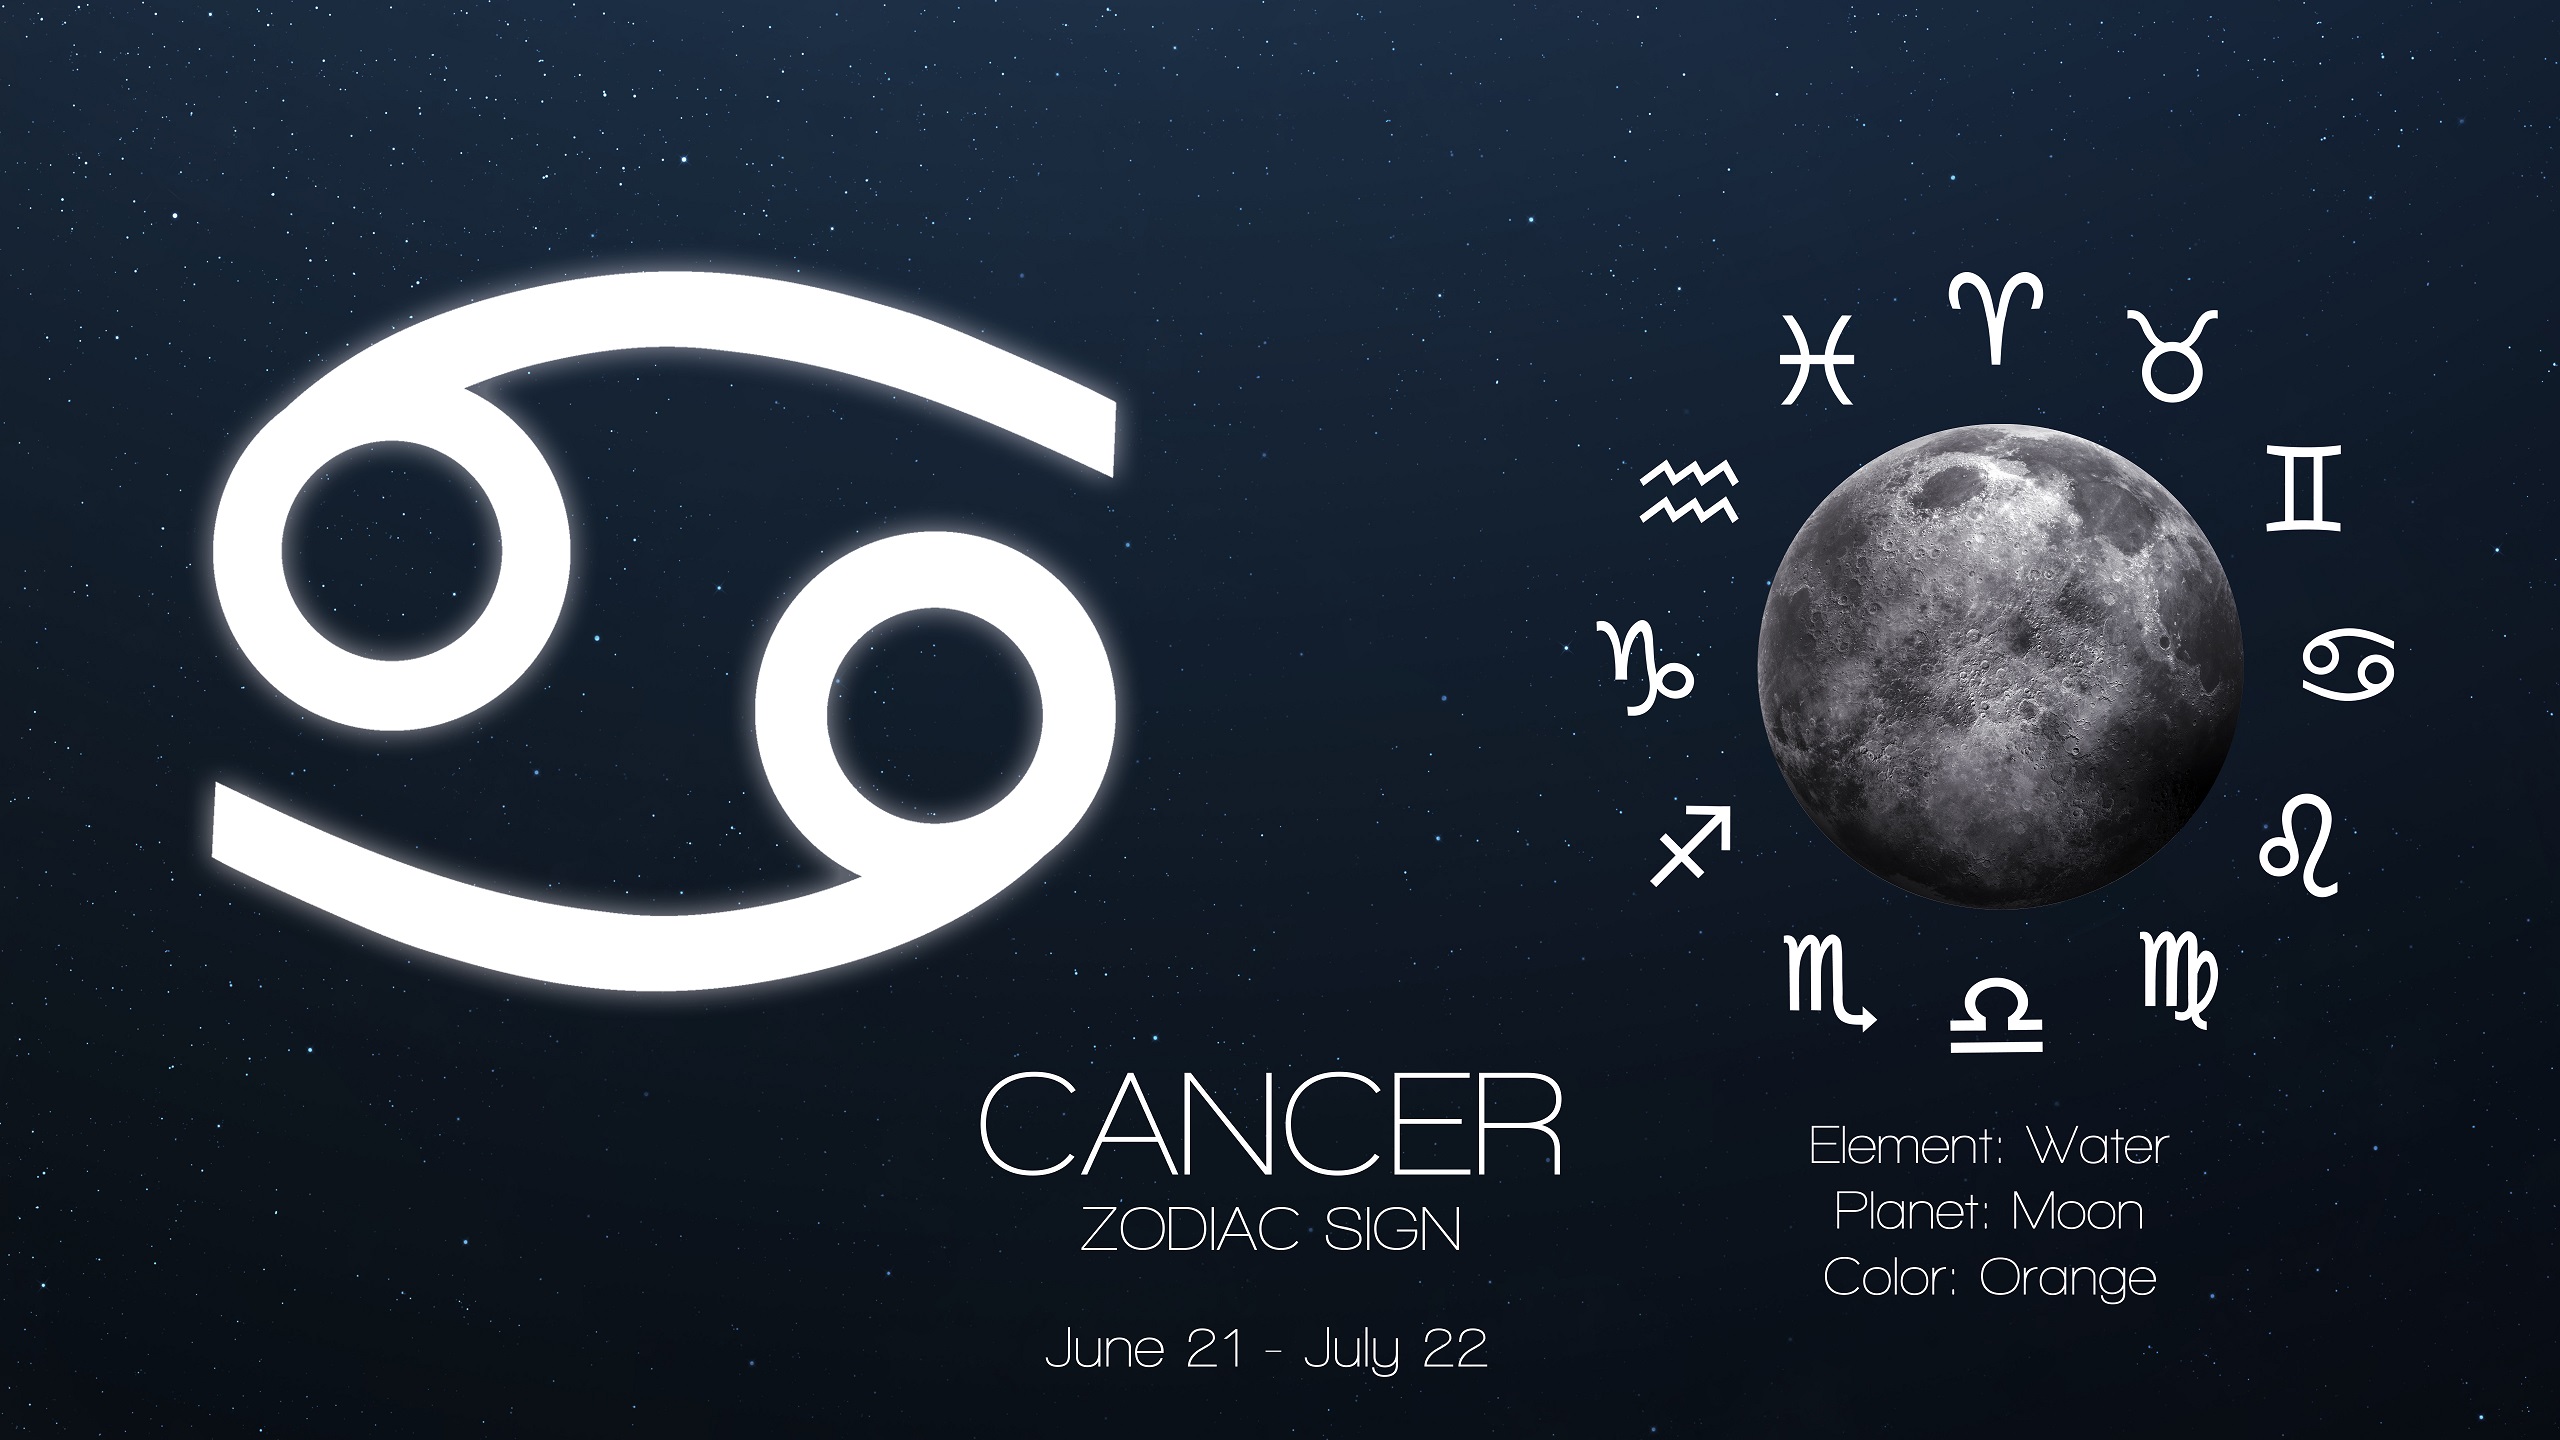 25 Captivating Facts About the Cancer Zodiac Sign